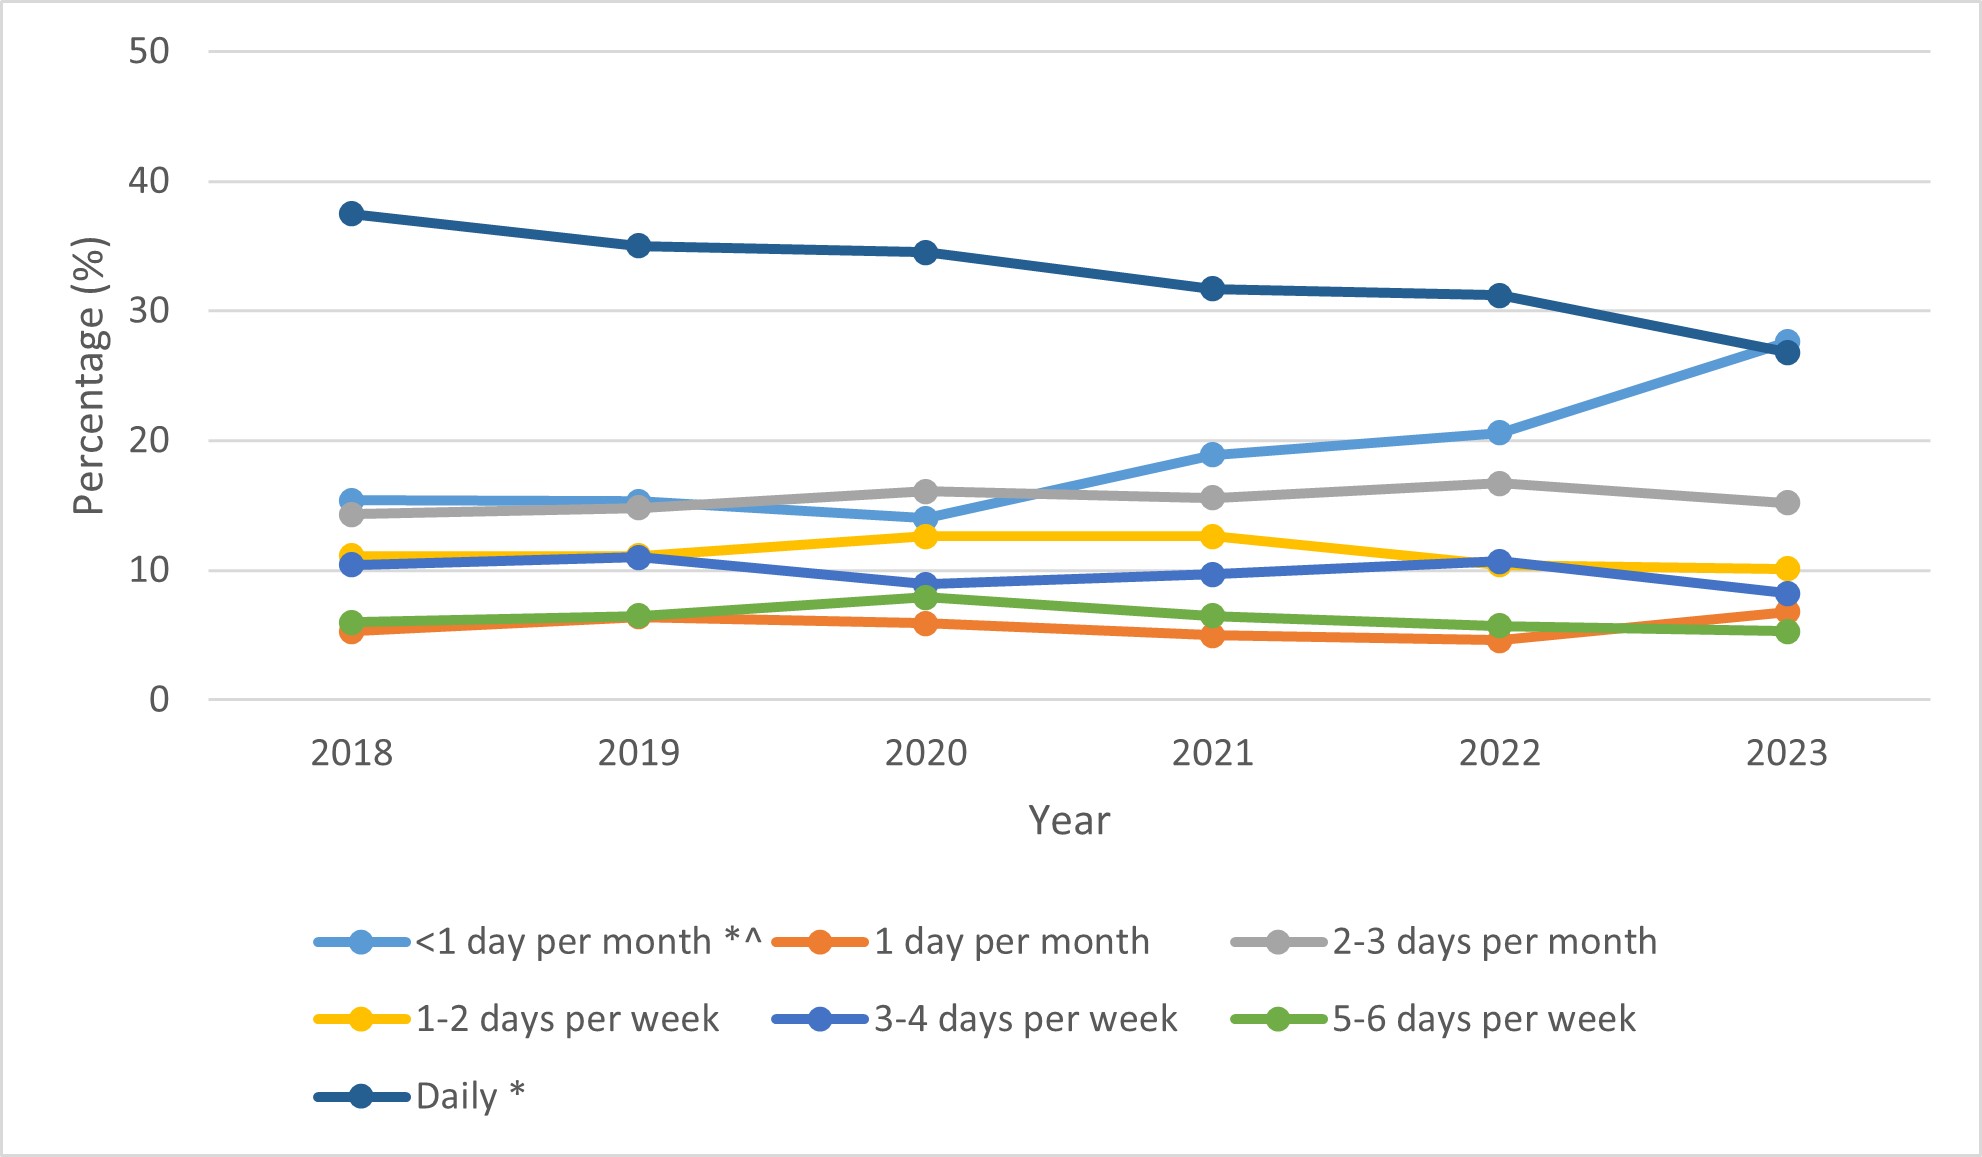 Figure 25: Frequency of cannabis use for medical purposes in the past 12 months, 2018 to 2023. Text description follows.